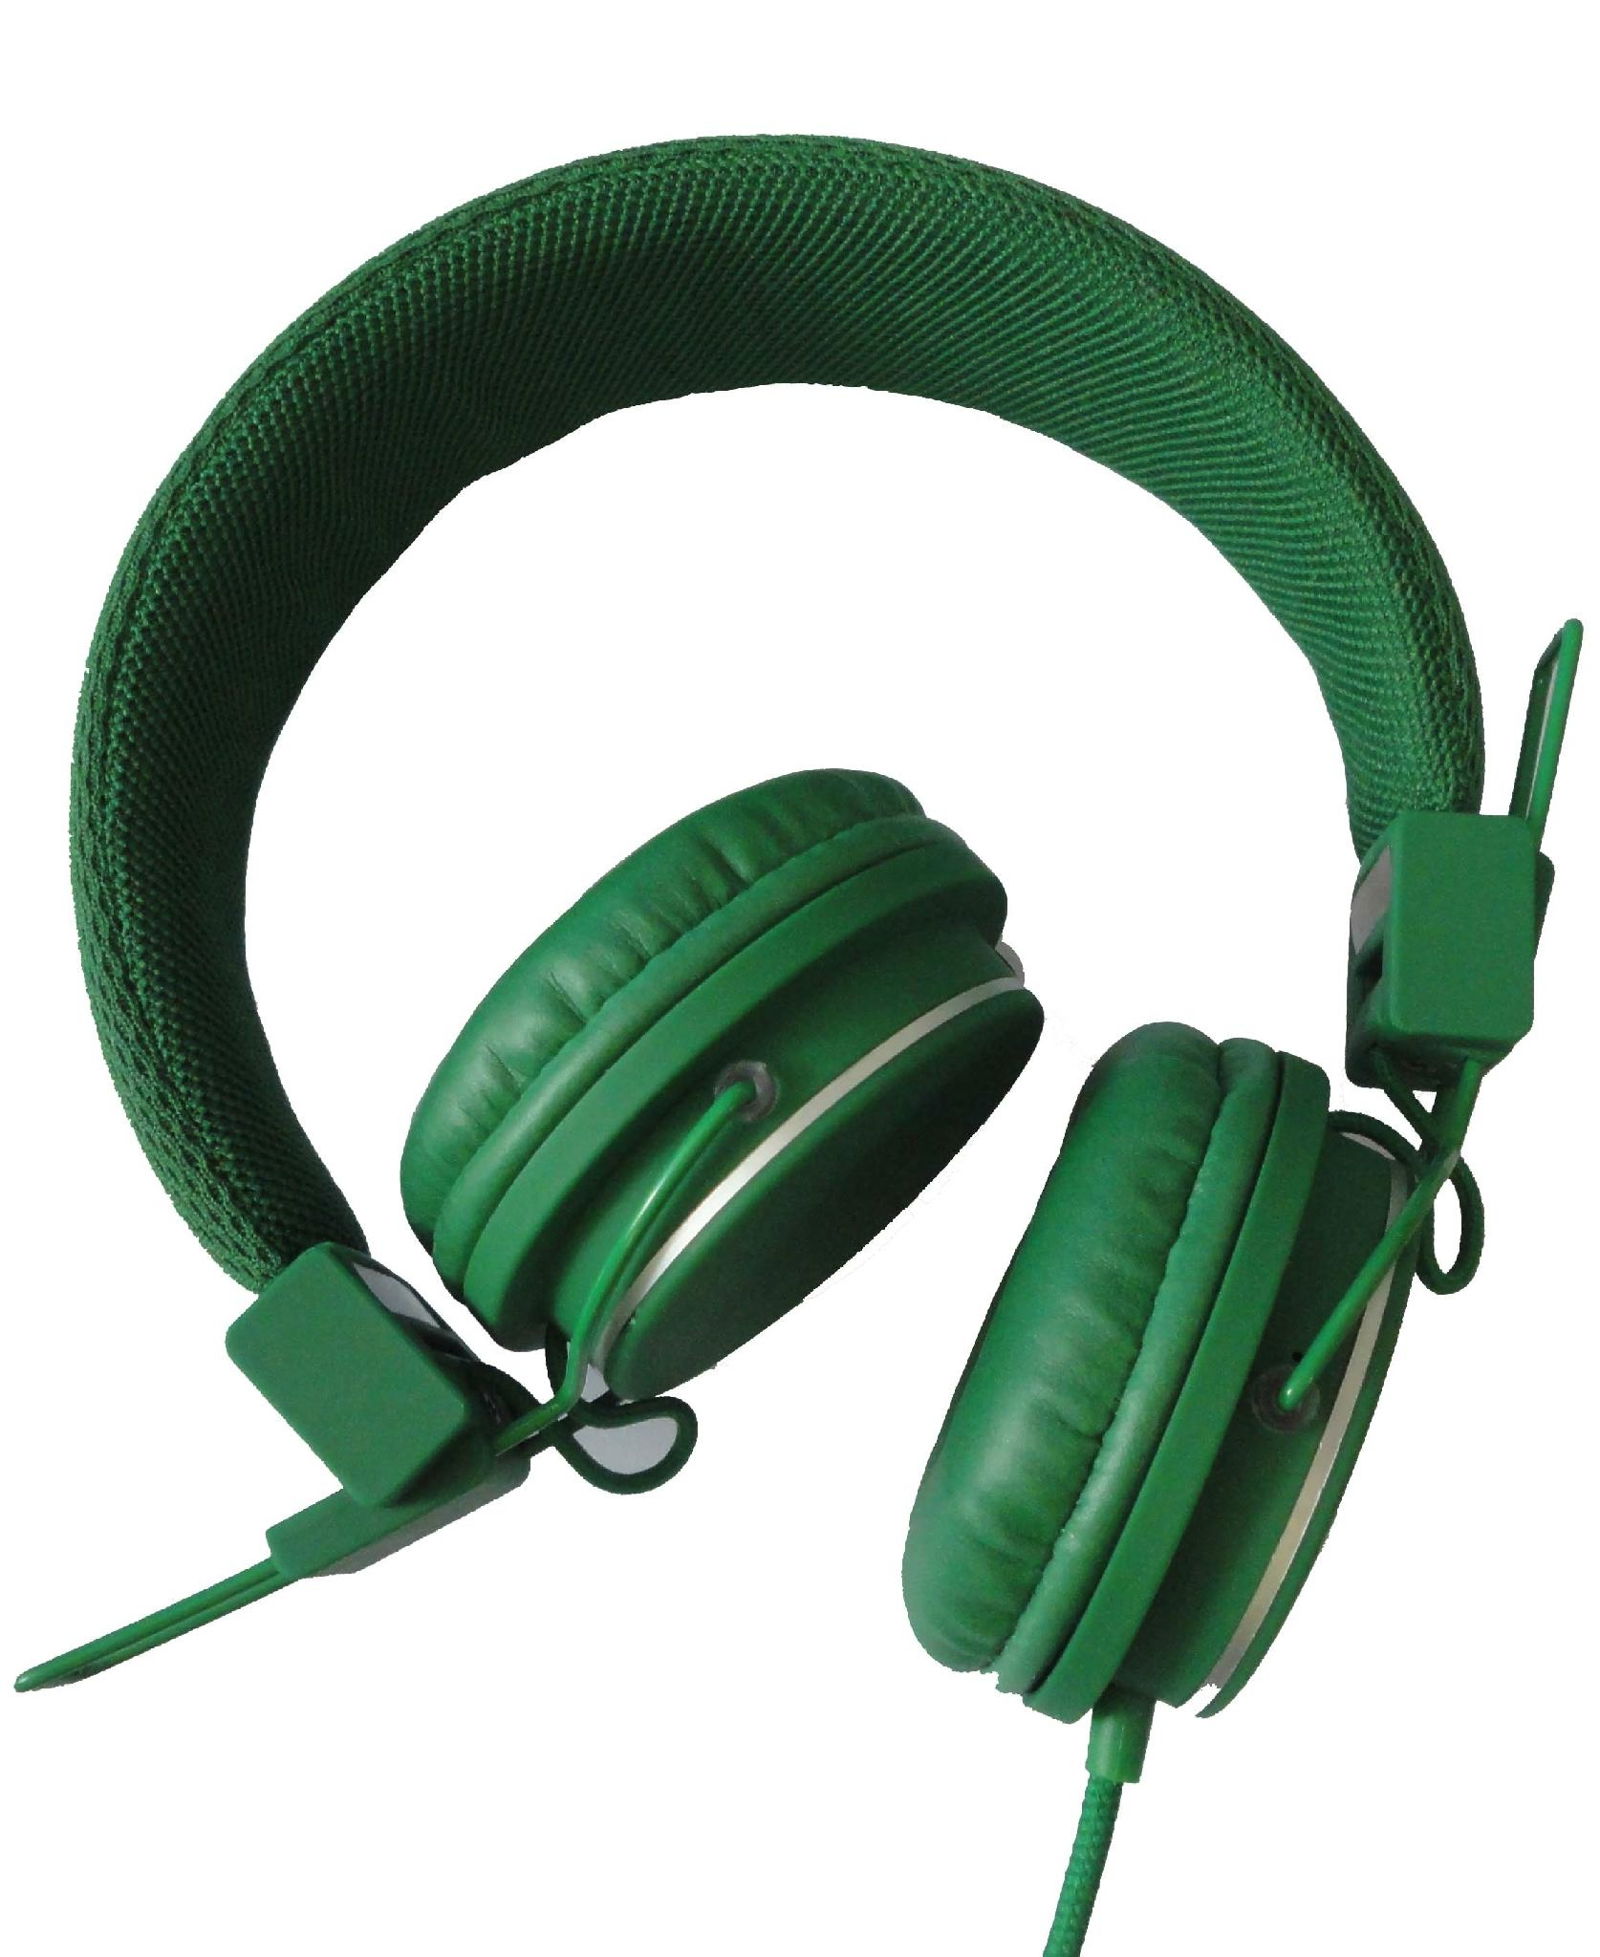 Wired Headband headphone for mobile 5